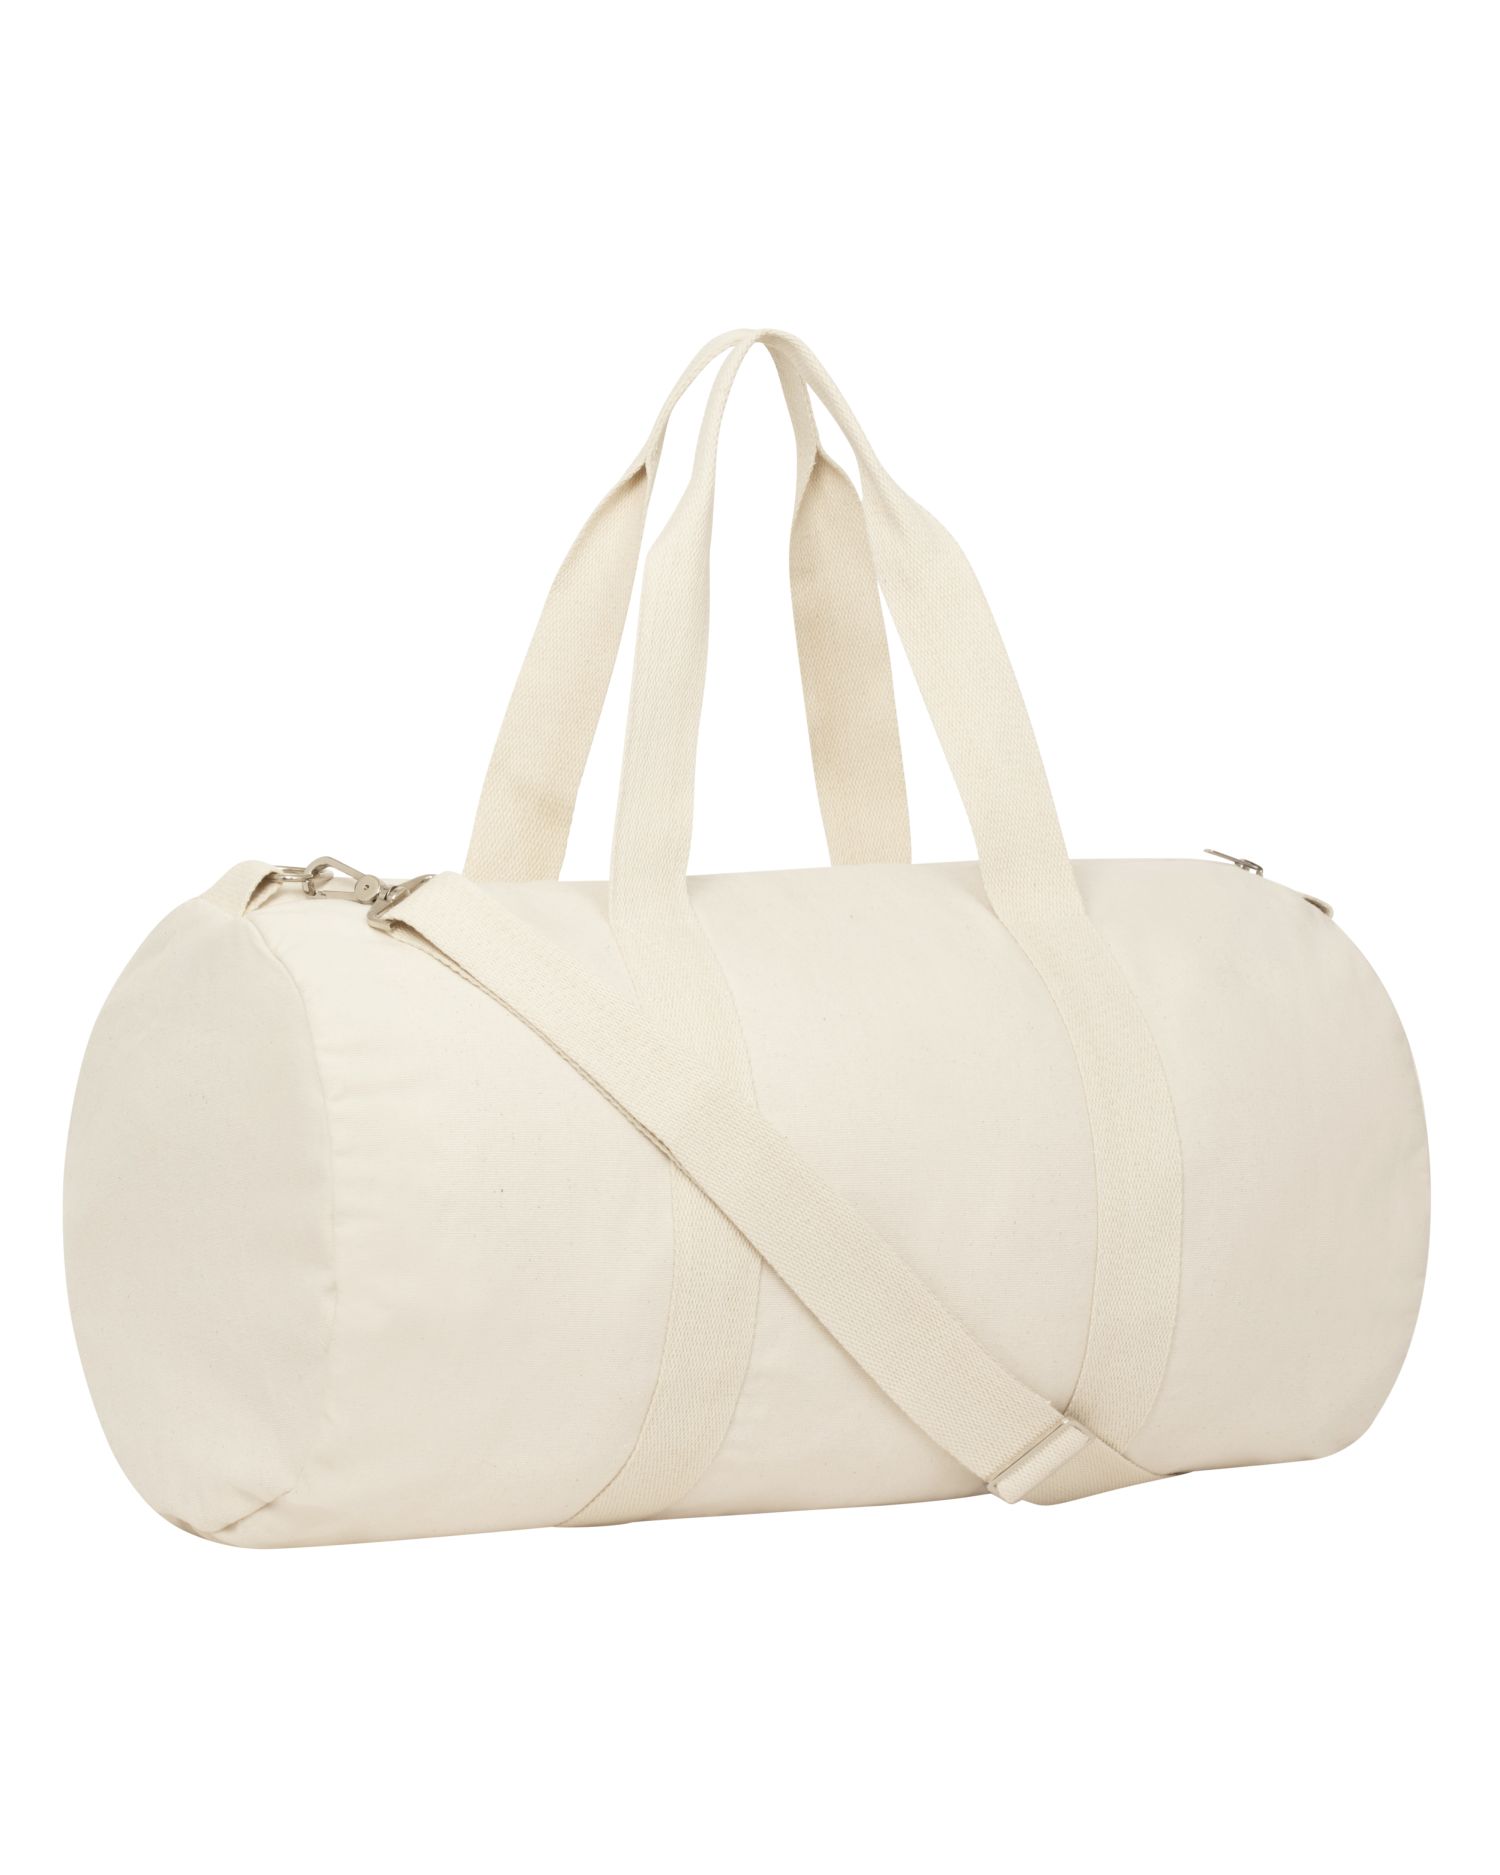 Tasche Duffle Bag in Farbe Natural